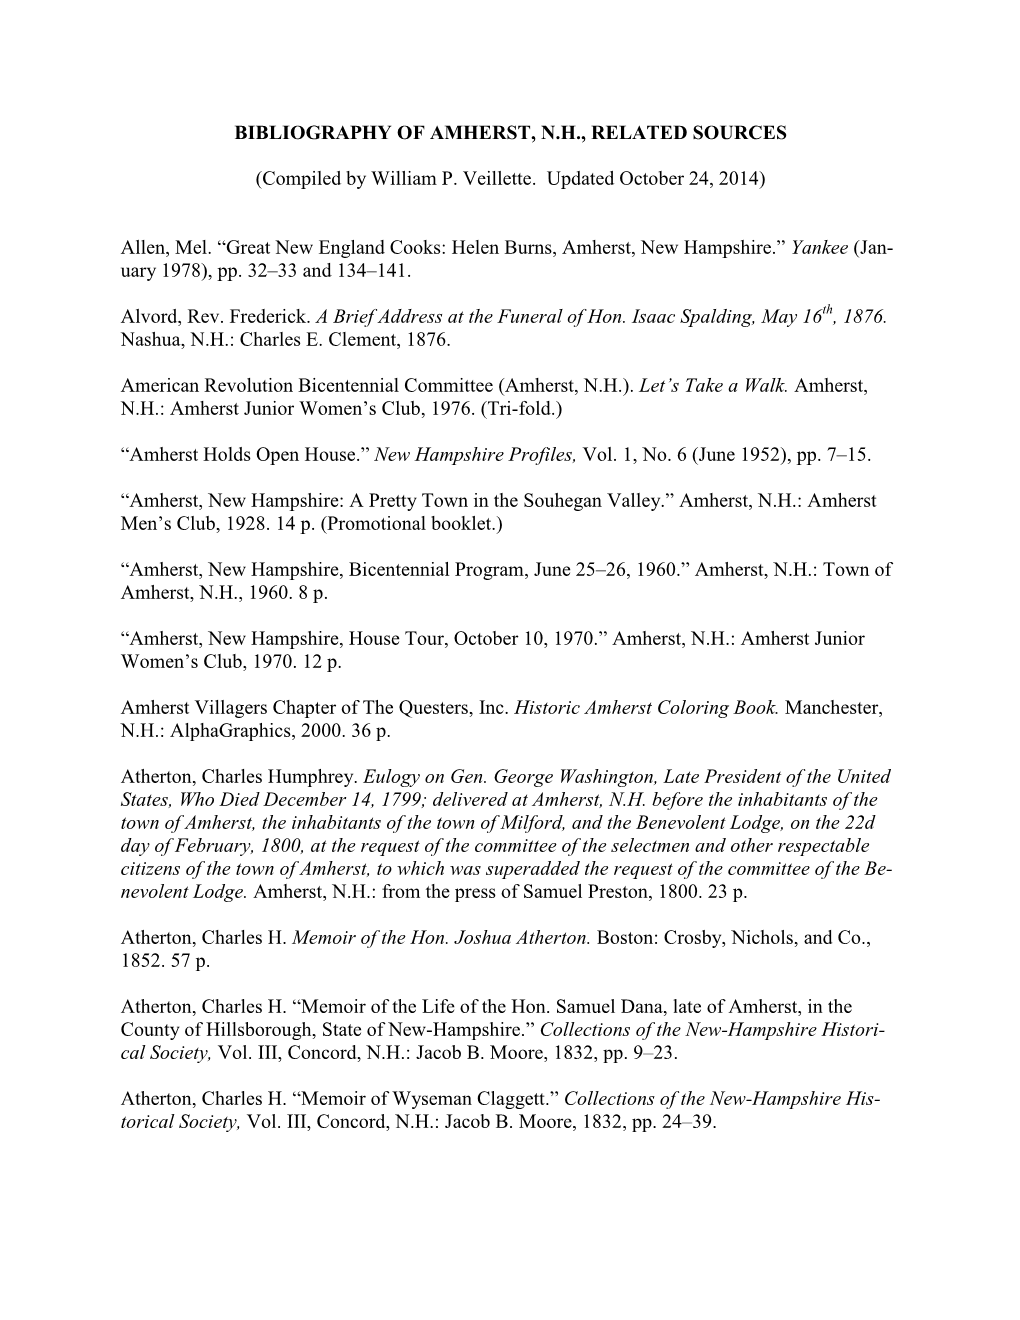 Bibliography of Publications Relating